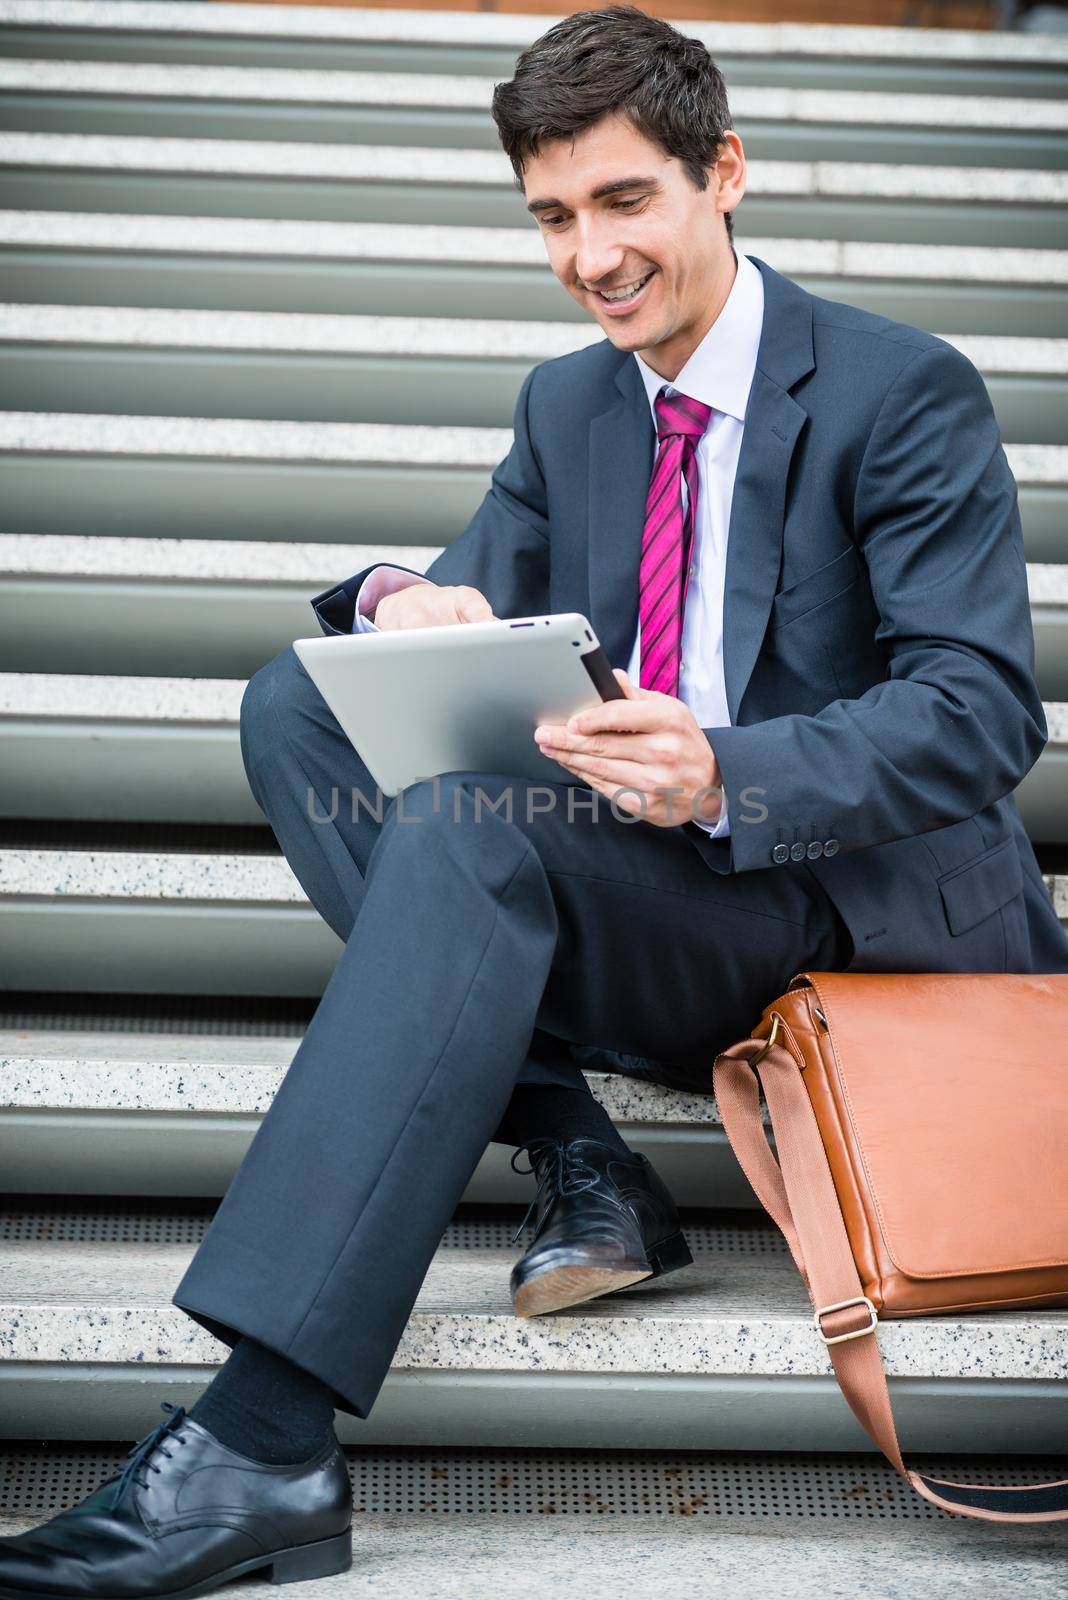 Young businessman smiling while using a tablet PC for online communication or data storage outdoors